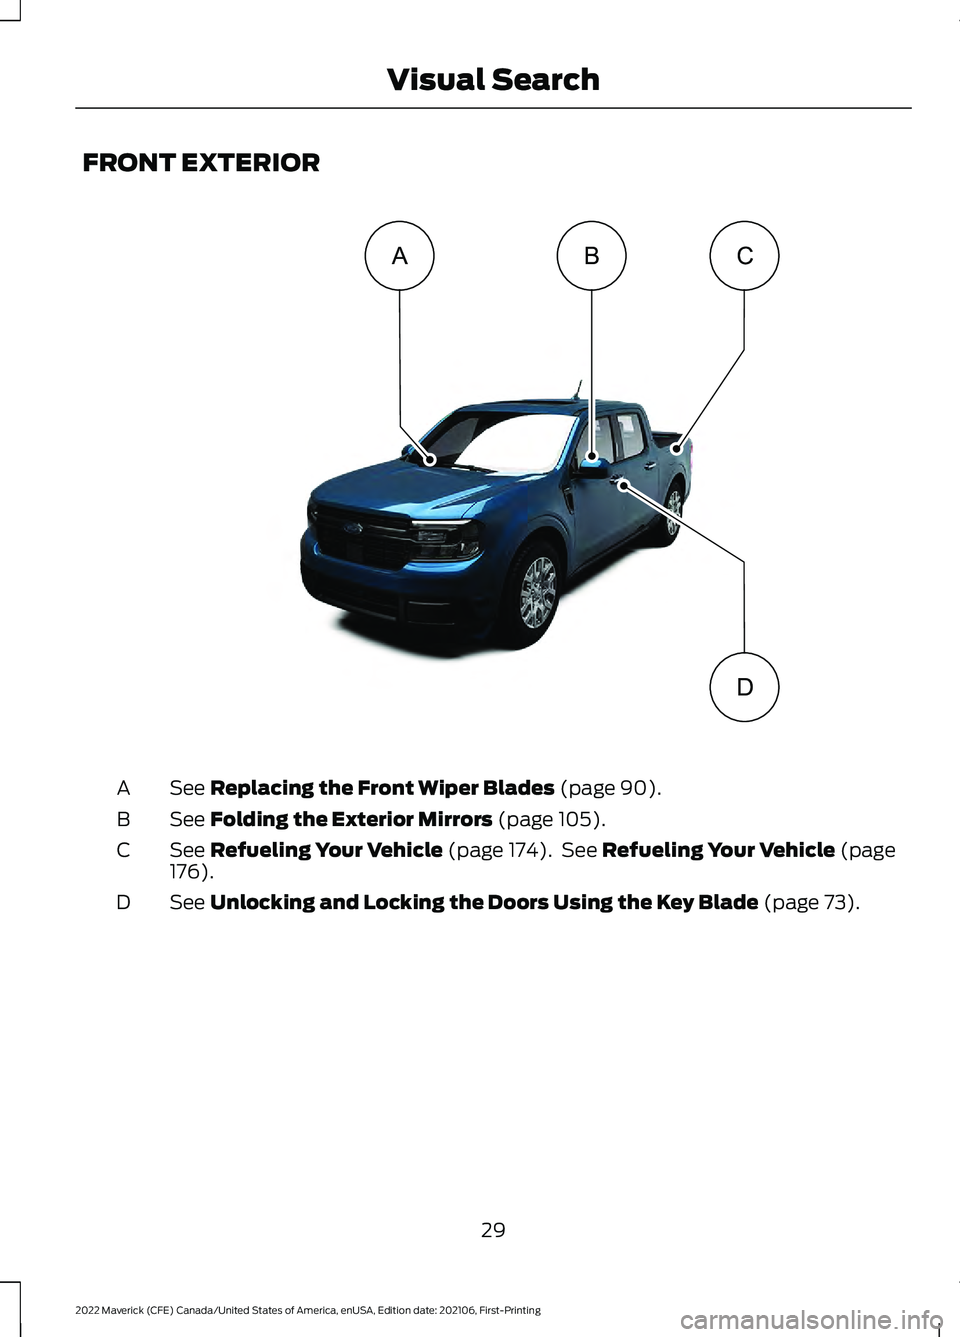 FORD MAVERICK 2022  Owners Manual FRONT EXTERIOR
See Replacing the Front Wiper Blades (page 90).
A
See 
Folding the Exterior Mirrors (page 105).
B
See 
Refueling Your Vehicle (page 174).  See Refueling Your Vehicle (page
176).
C
See 
